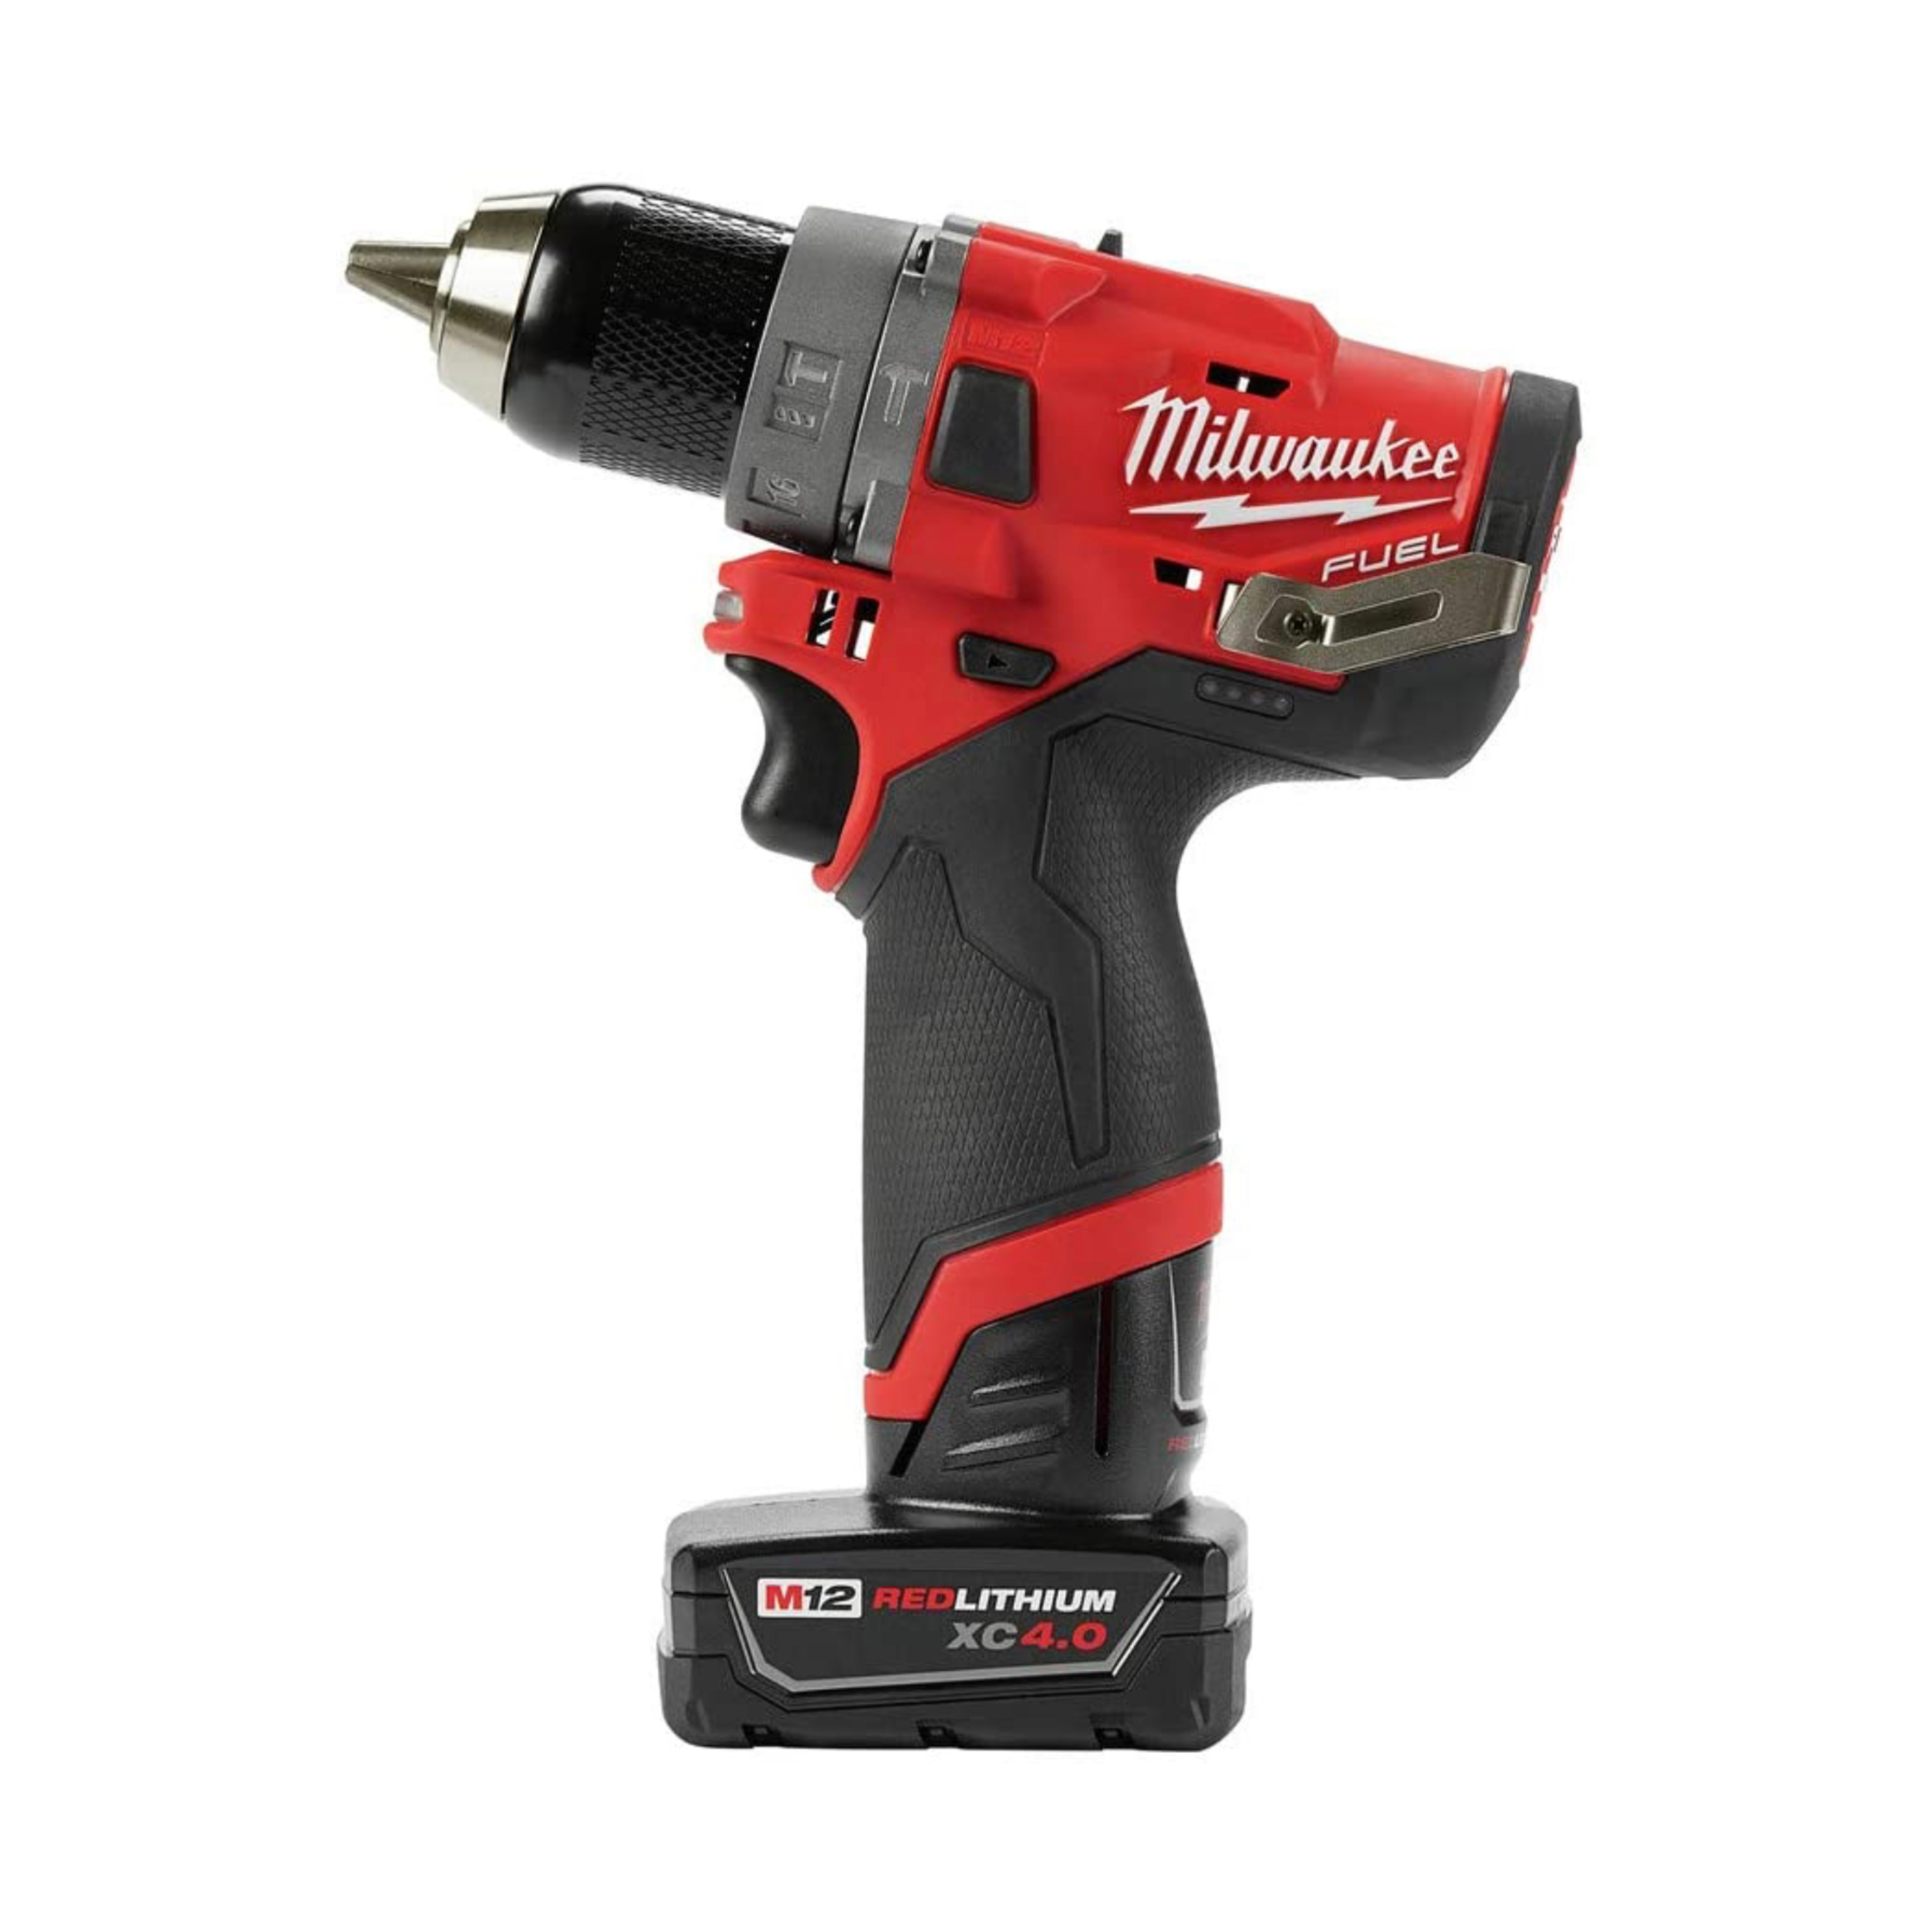 Milwaukee M12 FUEL 12-Volt Lithium-Ion Brushless Cordless Hammer Drill Driver Kit w/ 2 Batteries and Bag